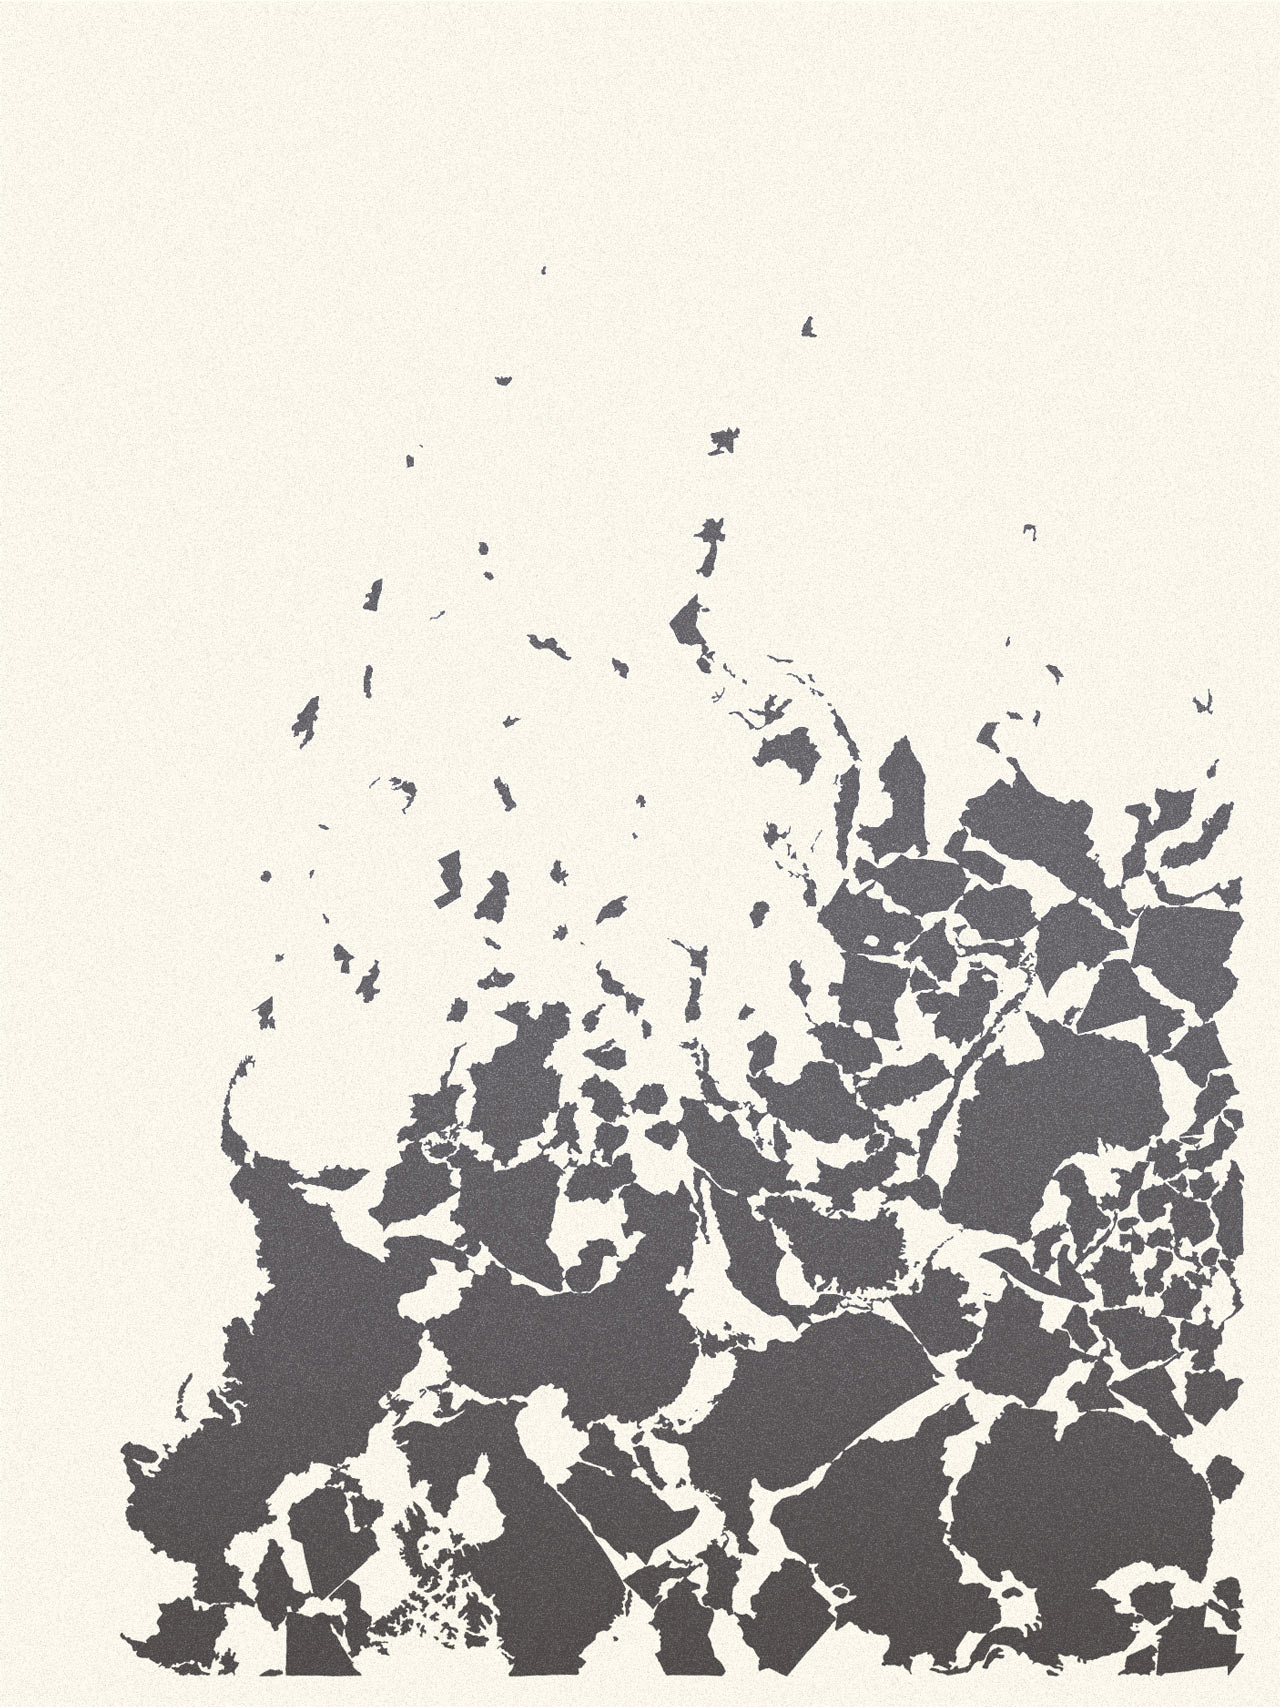 New Map II. An abstract print of a disintegrated political map of the world